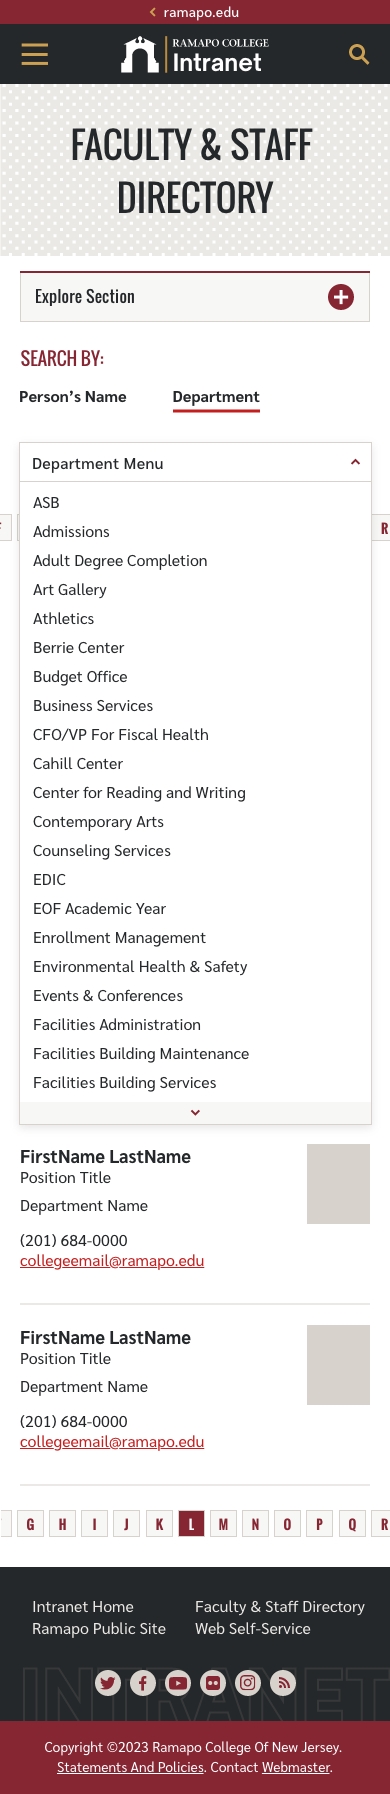 Faculty & Staff Contact Directory - Department dropdown